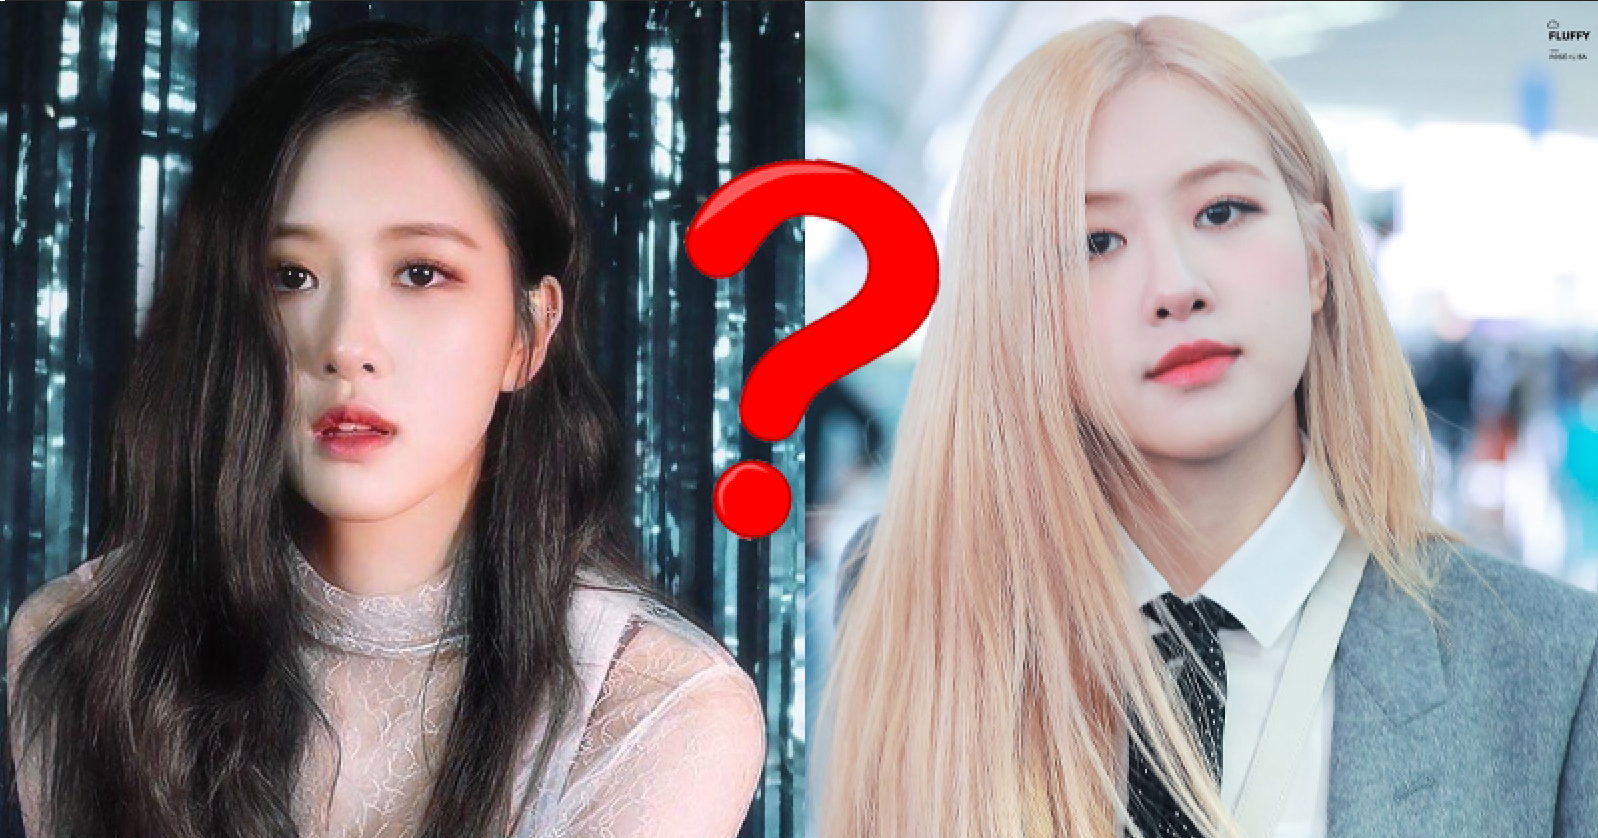 Style Consultant Reveals Why BLACKPINK Rosé Doesn't Look Good in Dark Eyebrows